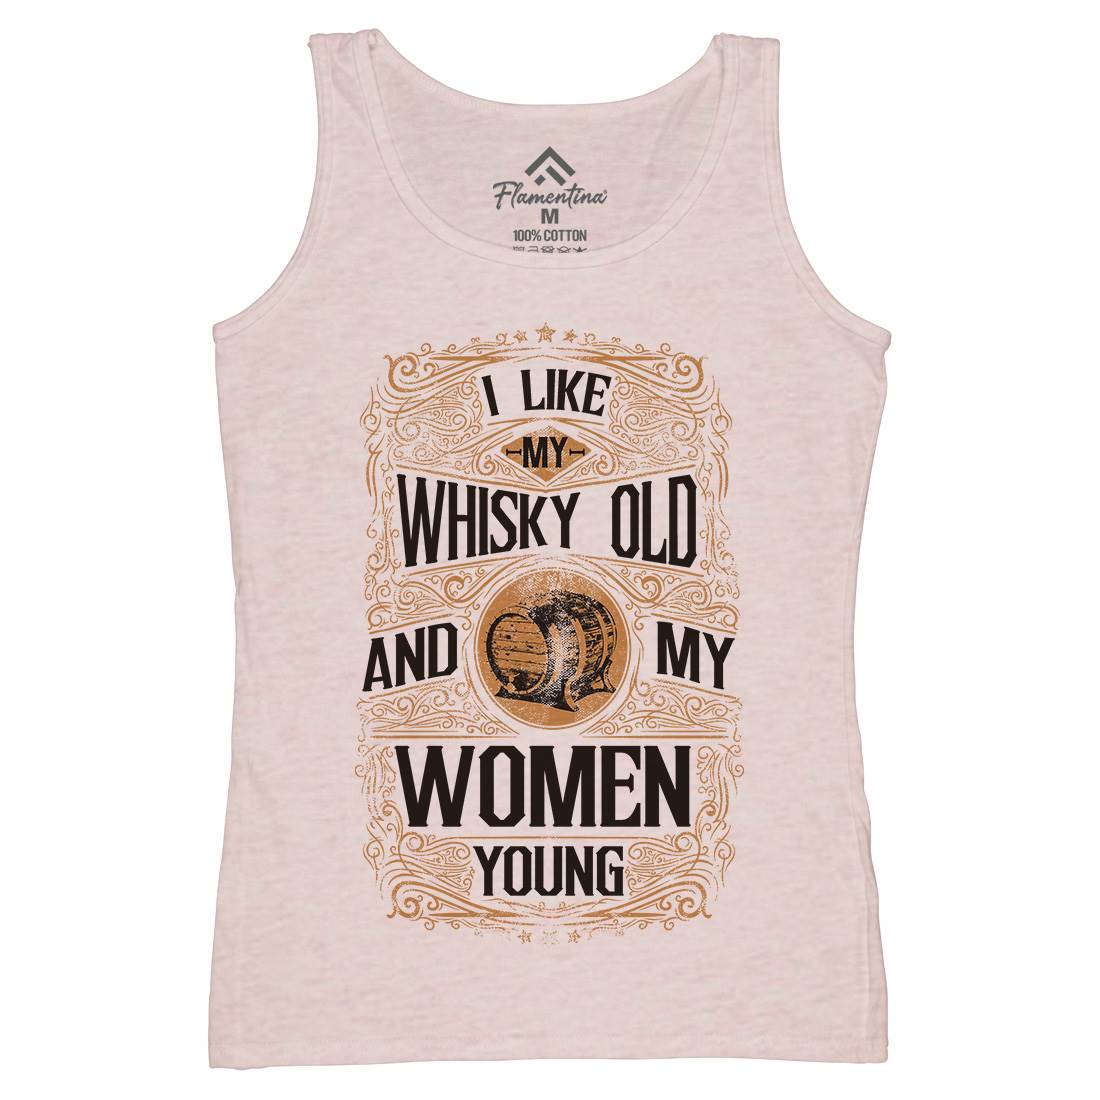 I Like My Whisky Old Womens Organic Tank Top Vest Drinks C946